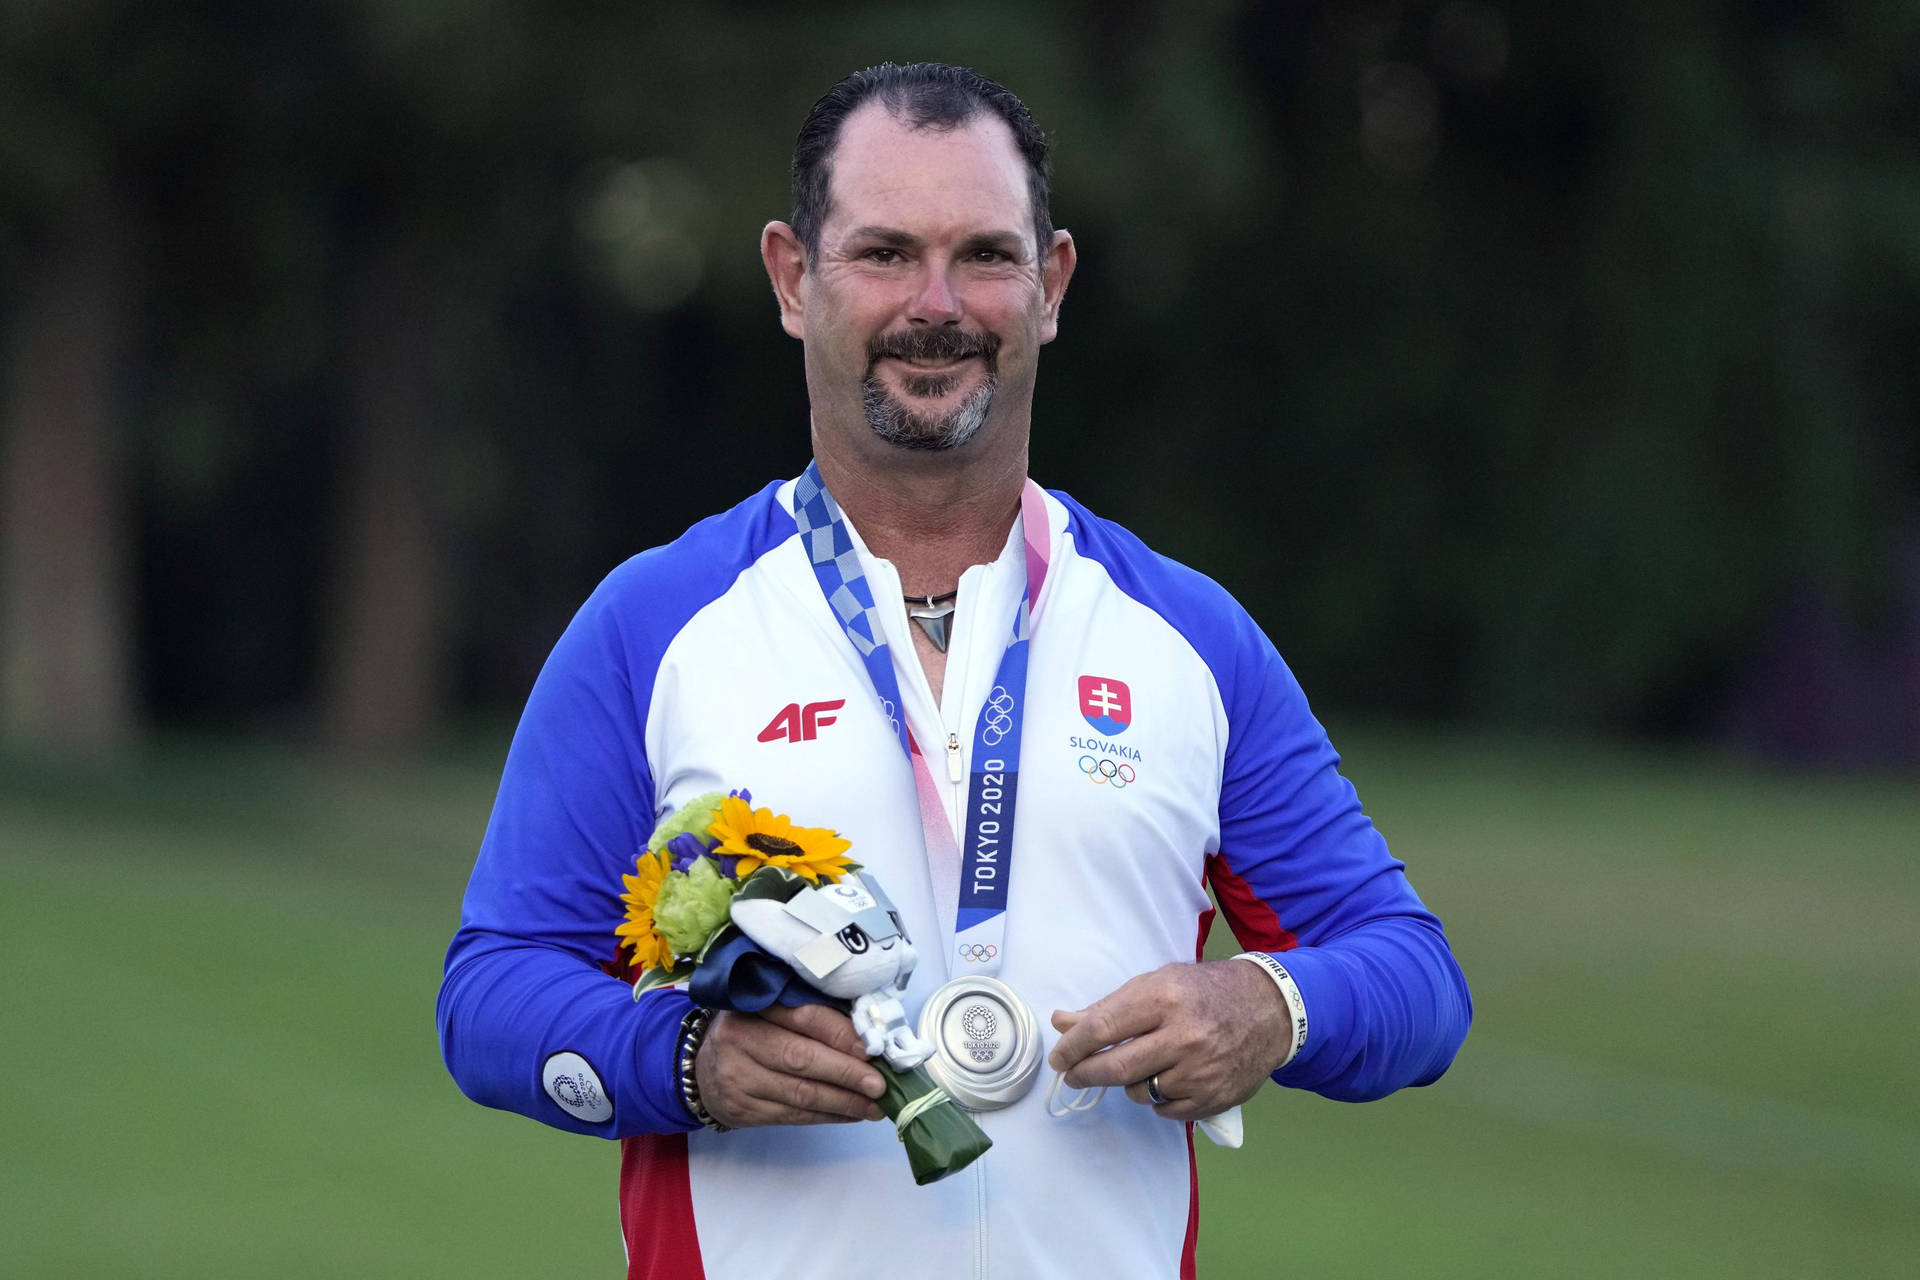 Rory Sabbatini With Silver Medal Wallpaper